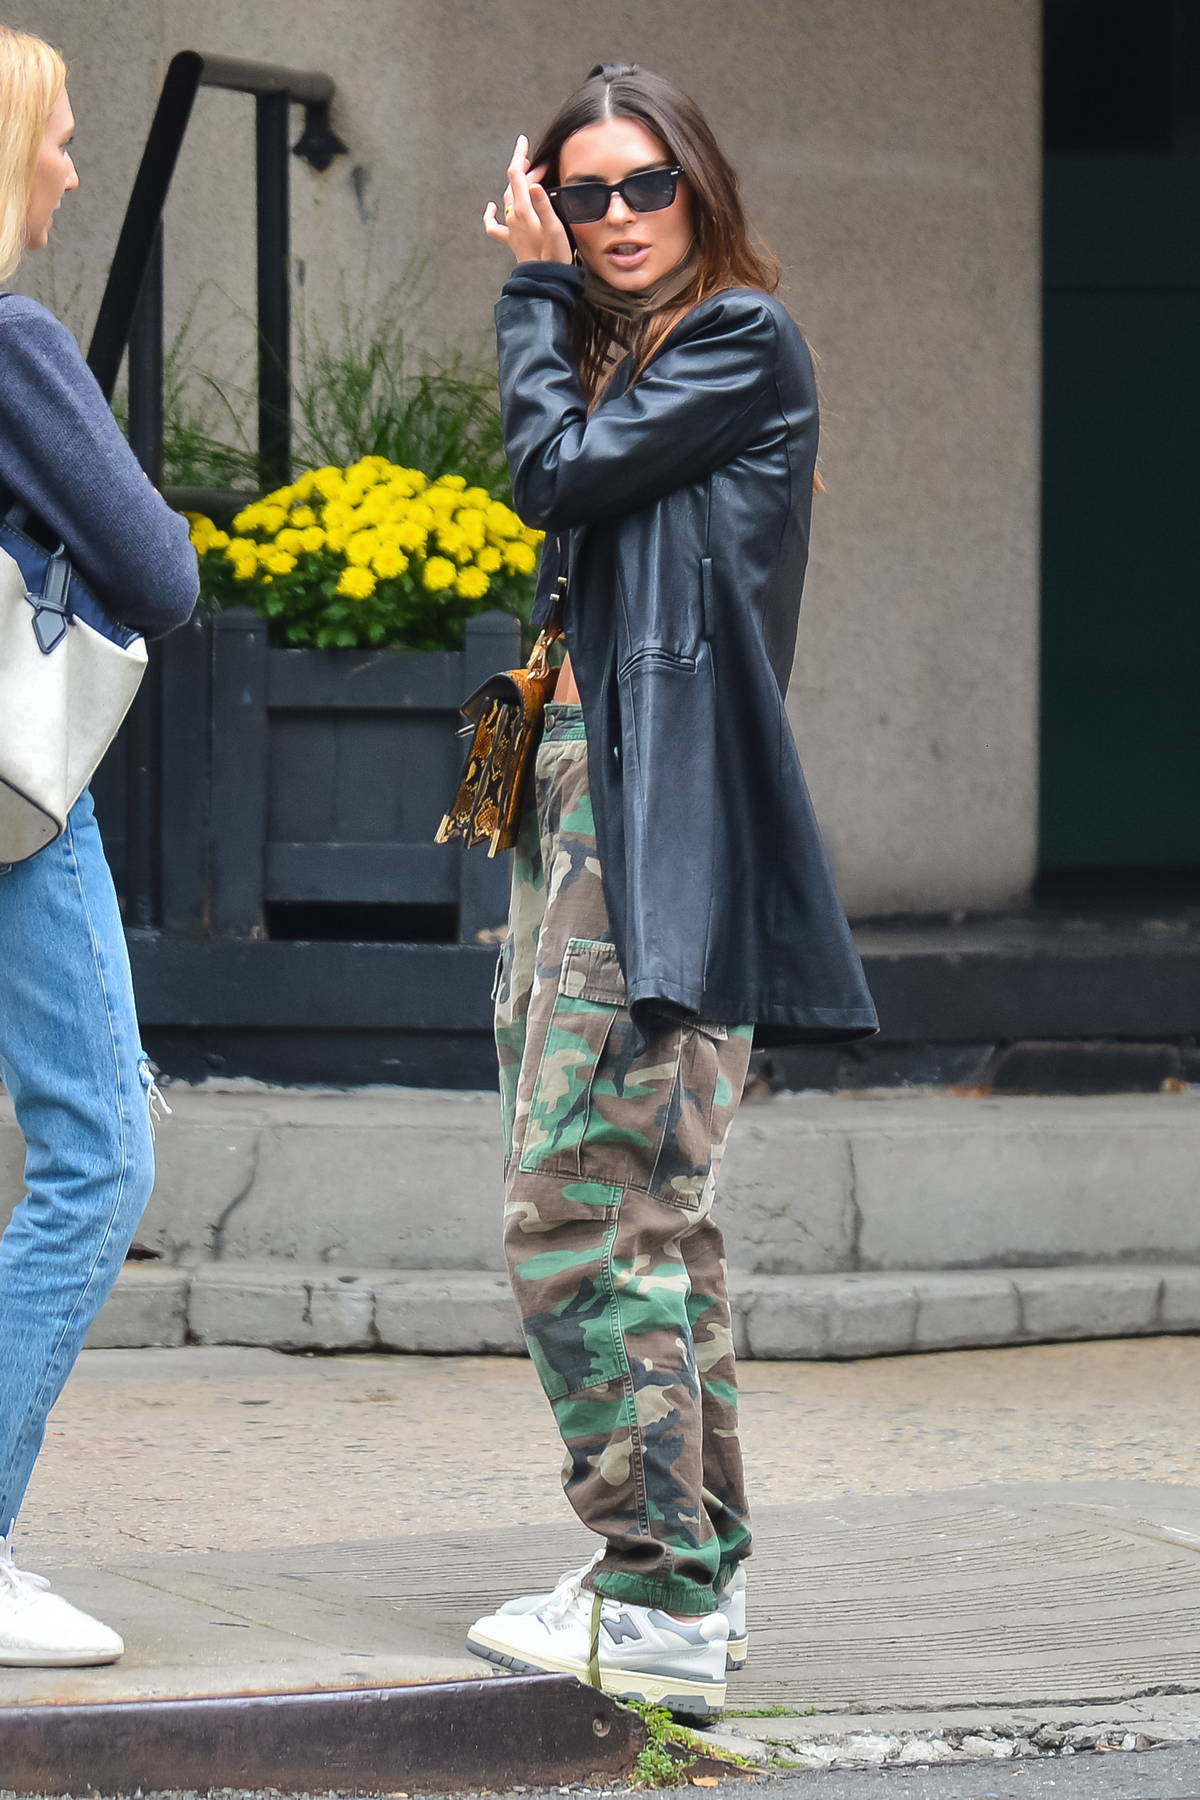 https://www.celebsfirst.com/wp-content/uploads/2021/10/emily-ratajkowski-seen-wearing-a-leather-jacket-and-camo-cargo-pants-during-a-solo-outing-in-new-york-city-051021_2.jpg